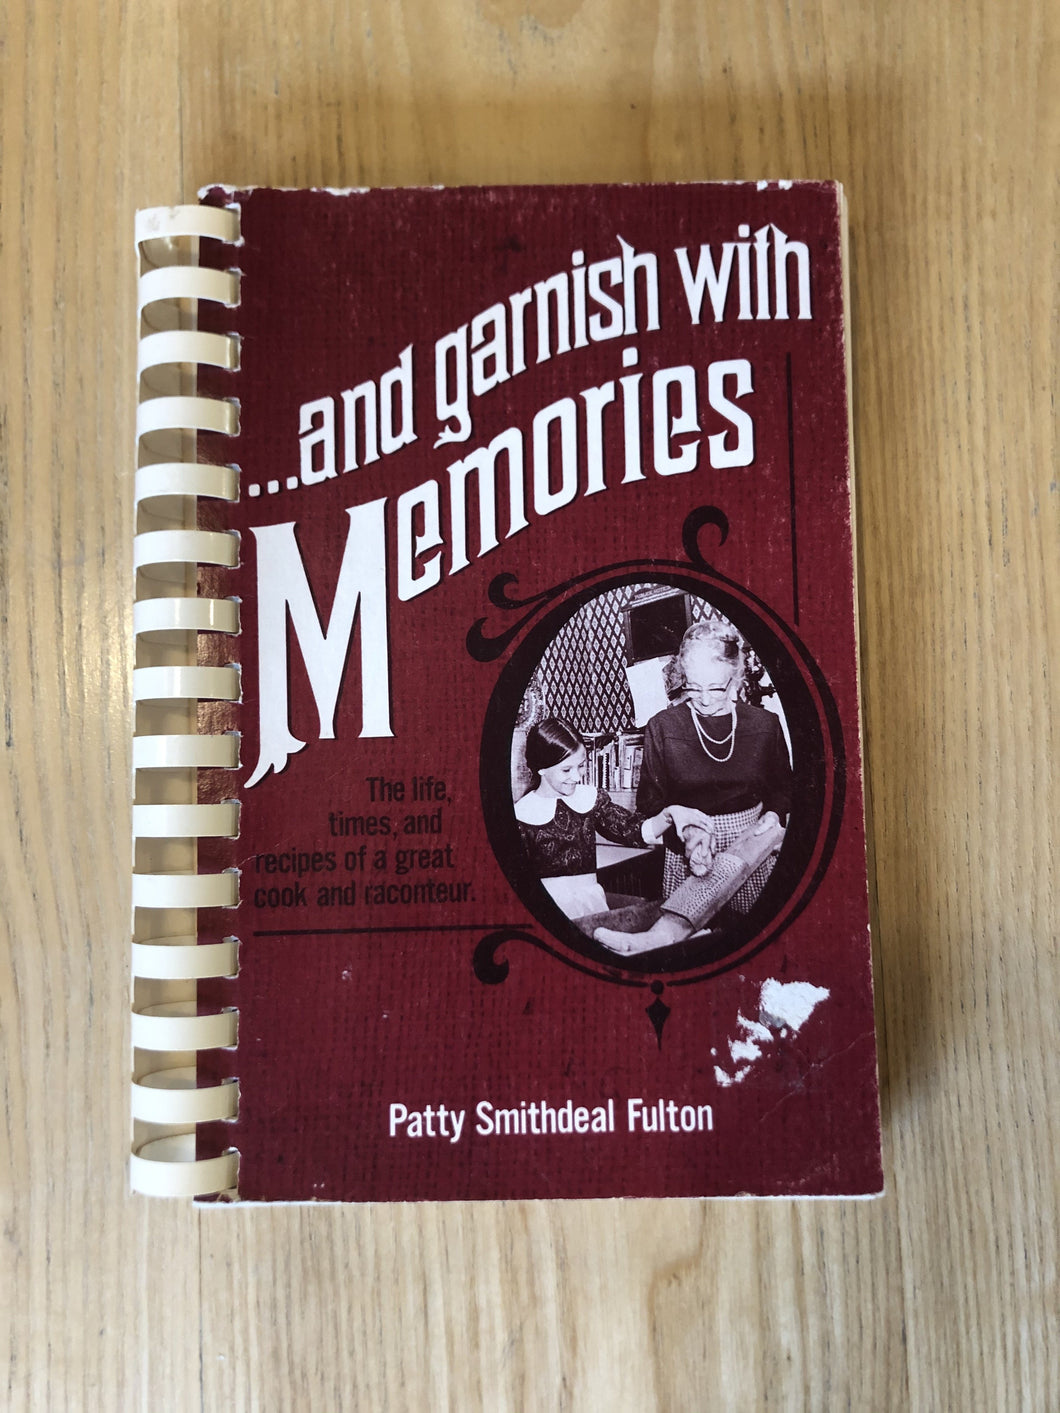 ...and Garnish with Memories by Patty Smithdeal Fulton